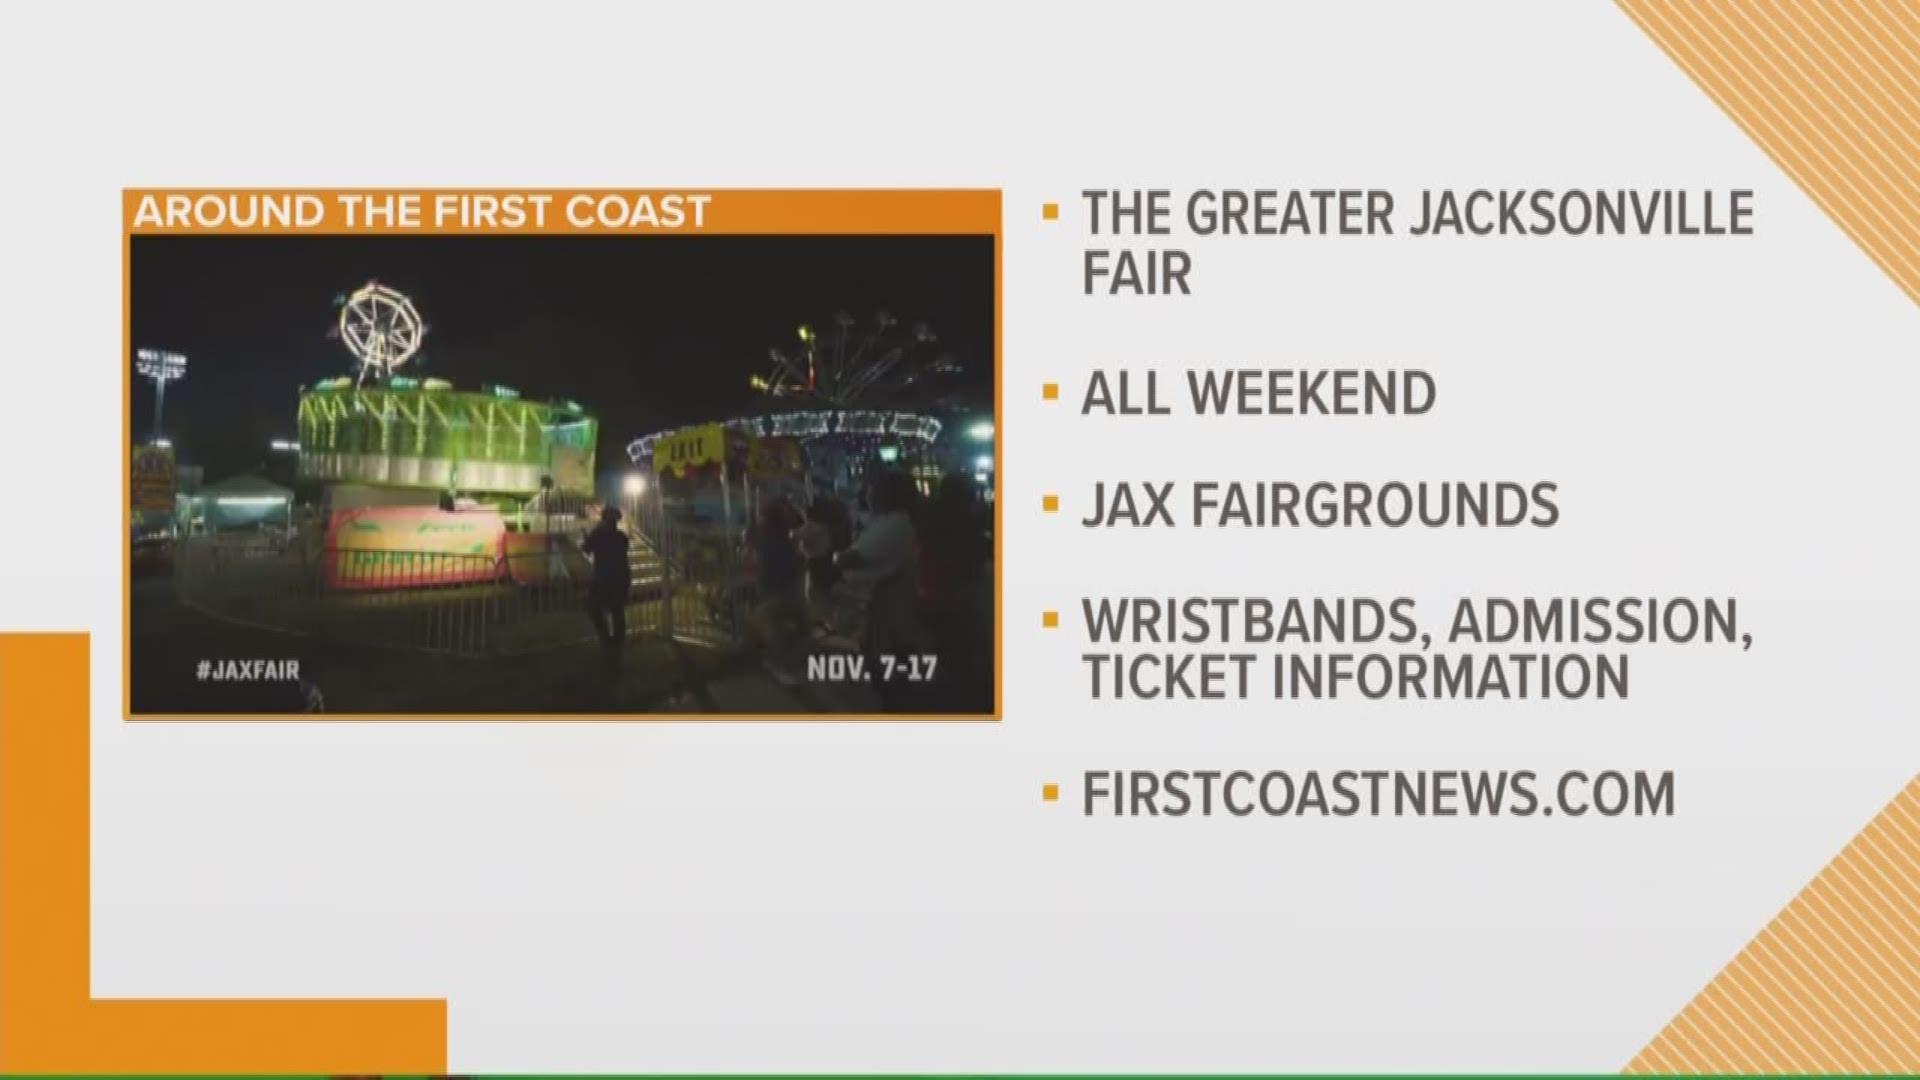 From the Porch Fest to the Greater Jacksonville Fair, there's plenty to do this weekend!